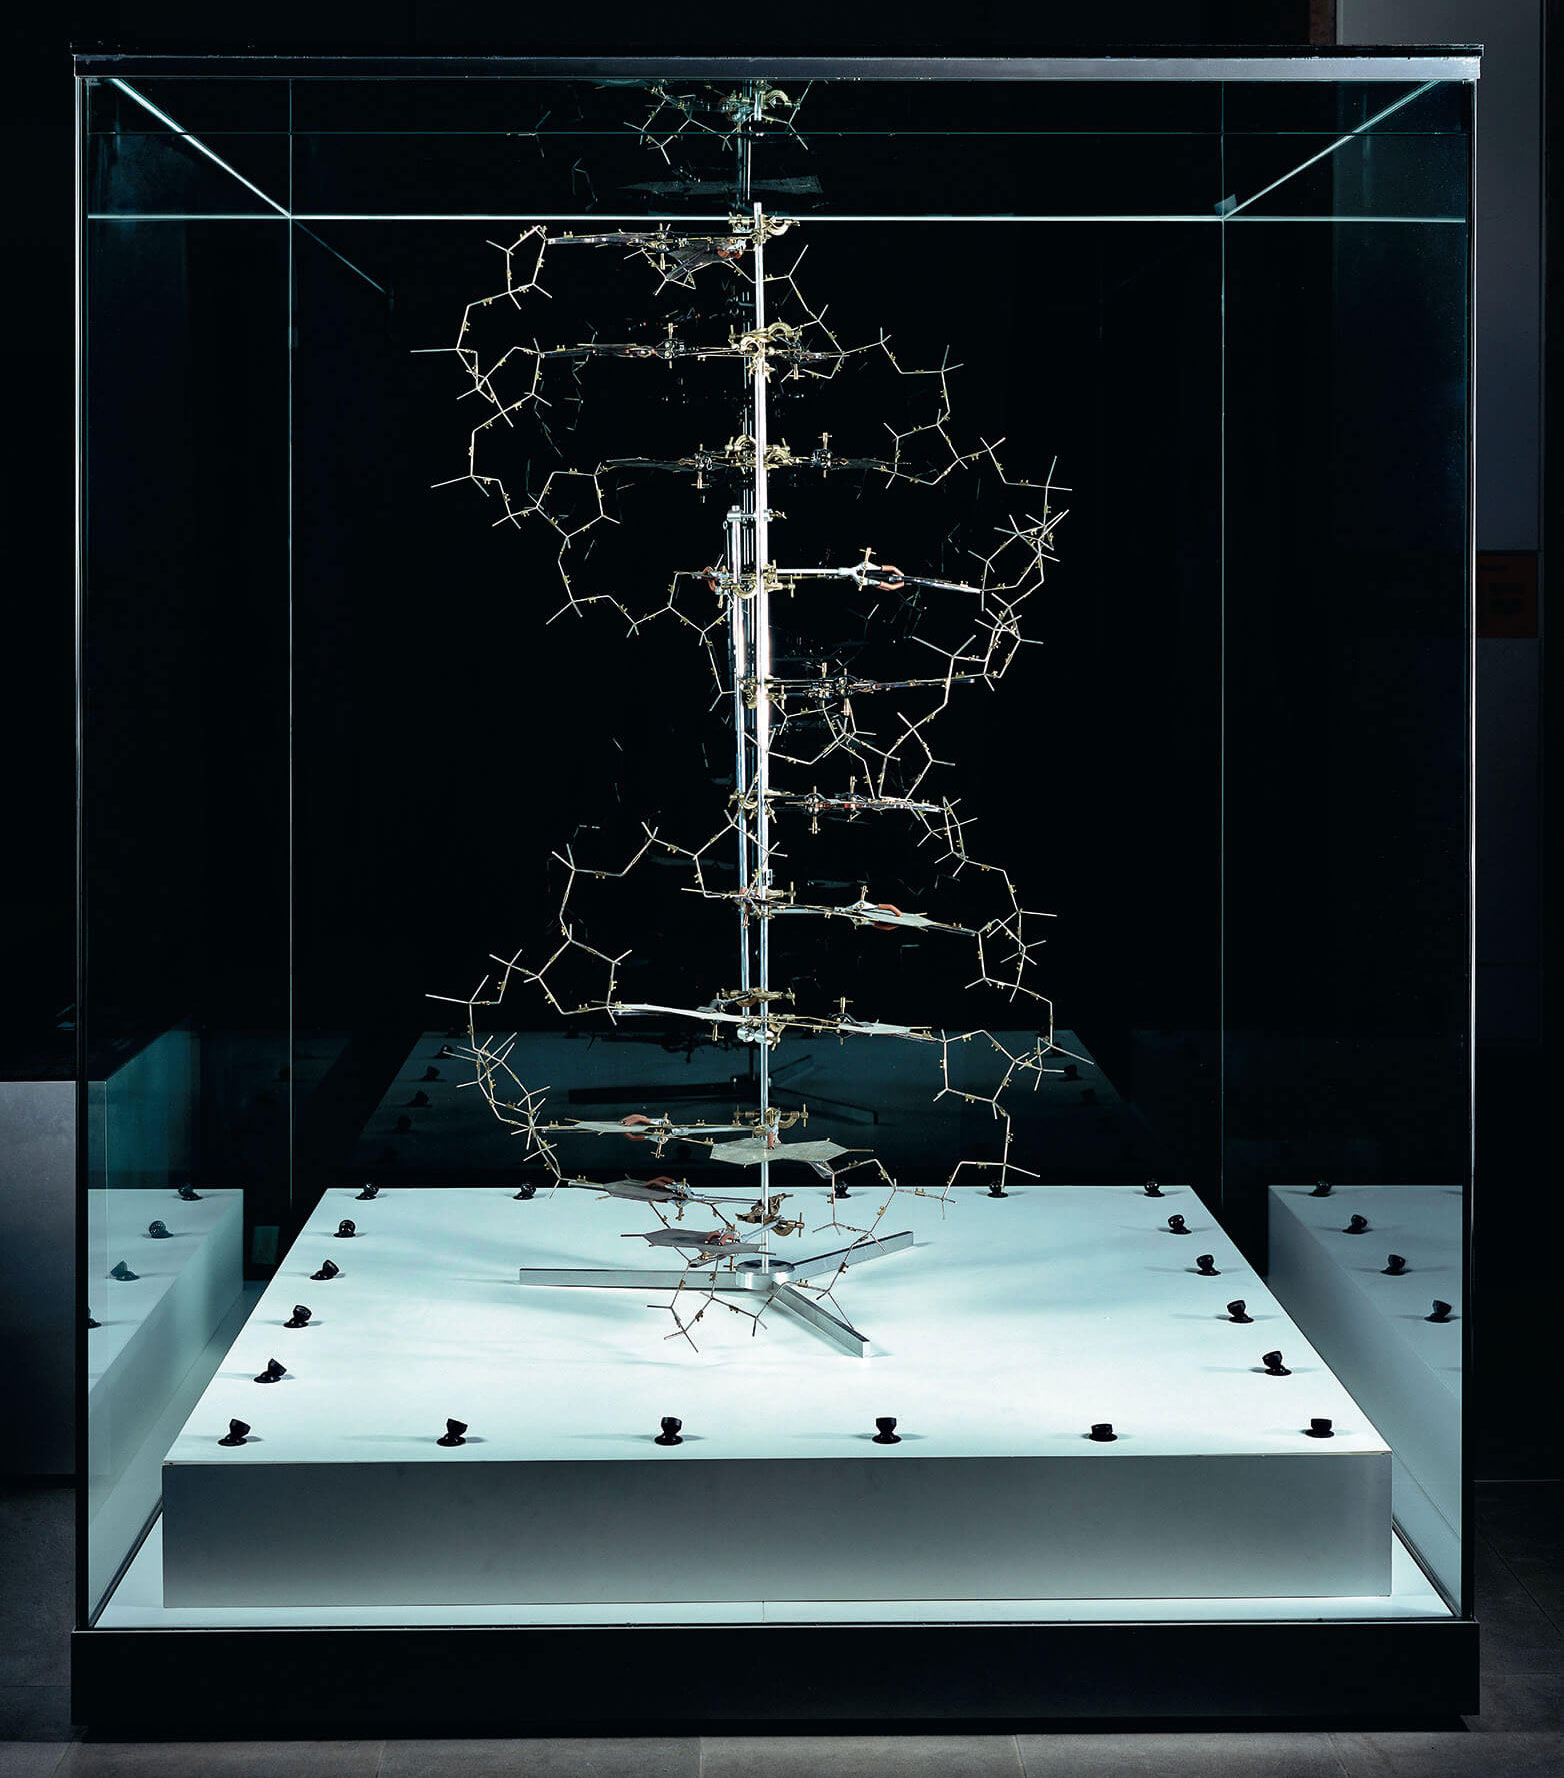 The original model created by James Watson and Francis Crick illustrates the double-helix structure of DNA. Photographed by Robert Clark, as featured in Evolution: A Visual Record